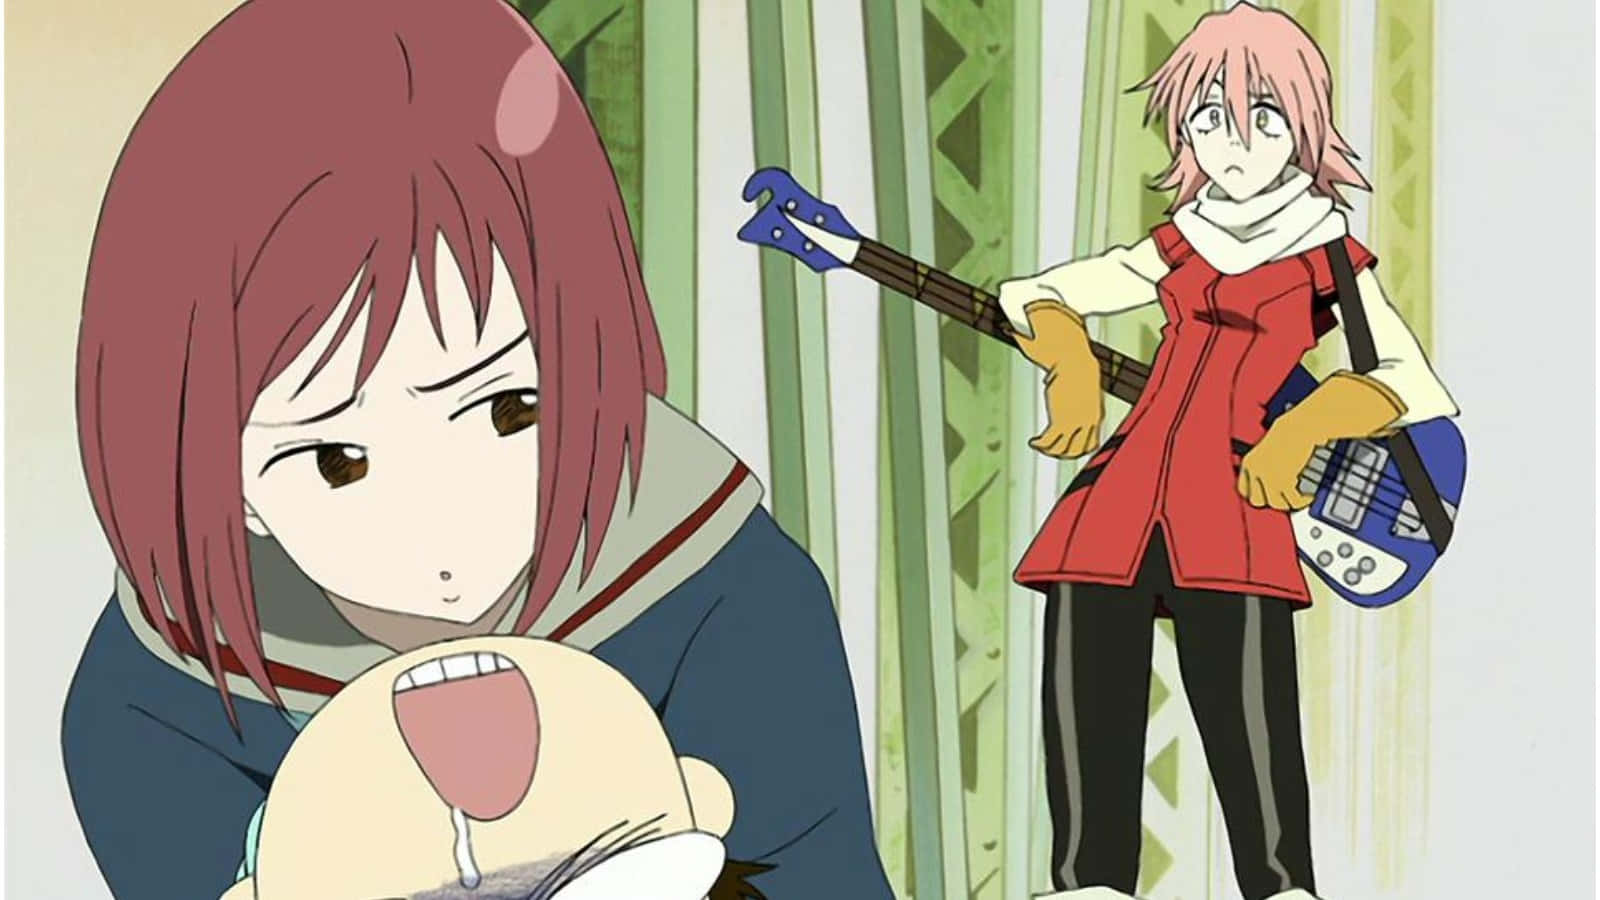 16-year-old Naota/Naota Nandaba as seen in the animated series FLCL